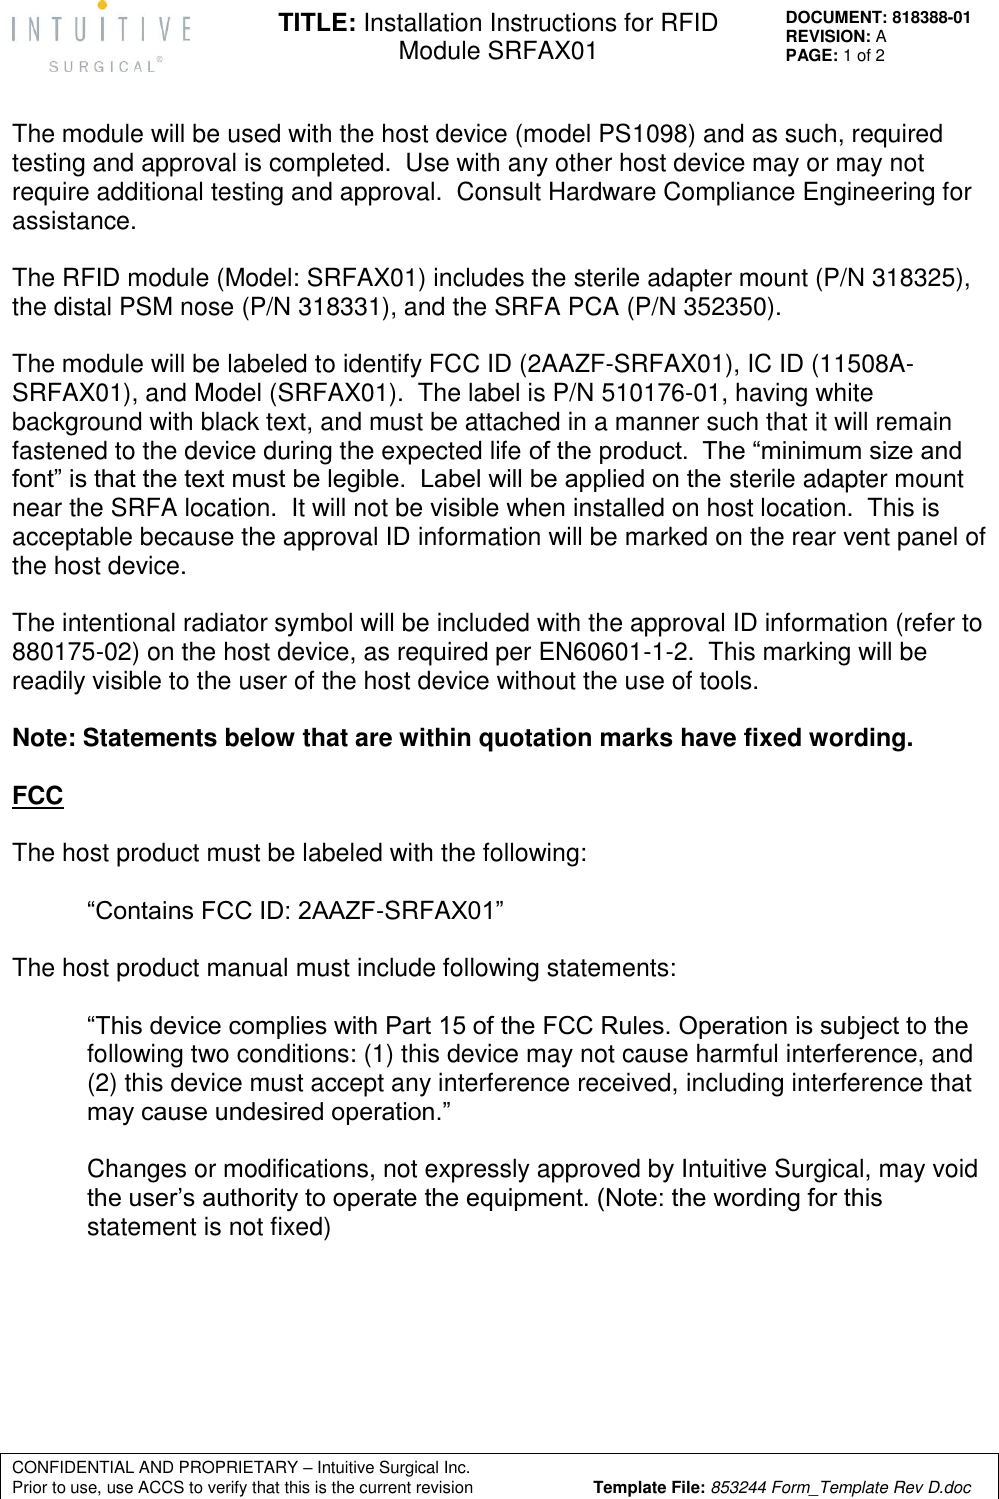   CONFIDENTIAL AND PROPRIETARY – Intuitive Surgical Inc.      Prior to use, use ACCS to verify that this is the current revision  Template File: 853244 Form_Template Rev D.doc DOCUMENT: 818388-01 REVISION: A PAGE: 1 of 2 TITLE: Installation Instructions for RFID Module SRFAX01   The module will be used with the host device (model PS1098) and as such, required testing and approval is completed.  Use with any other host device may or may not require additional testing and approval.  Consult Hardware Compliance Engineering for assistance.  The RFID module (Model: SRFAX01) includes the sterile adapter mount (P/N 318325), the distal PSM nose (P/N 318331), and the SRFA PCA (P/N 352350).  The module will be labeled to identify FCC ID (2AAZF-SRFAX01), IC ID (11508A-SRFAX01), and Model (SRFAX01).  The label is P/N 510176-01, having white background with black text, and must be attached in a manner such that it will remain fastened to the device during the expected life of the product.  The “minimum size and font” is that the text must be legible.  Label will be applied on the sterile adapter mount near the SRFA location.  It will not be visible when installed on host location.  This is acceptable because the approval ID information will be marked on the rear vent panel of the host device.  The intentional radiator symbol will be included with the approval ID information (refer to 880175-02) on the host device, as required per EN60601-1-2.  This marking will be readily visible to the user of the host device without the use of tools.  Note: Statements below that are within quotation marks have fixed wording.  FCC  The host product must be labeled with the following:  “Contains FCC ID: 2AAZF-SRFAX01”  The host product manual must include following statements:  “This device complies with Part 15 of the FCC Rules. Operation is subject to the following two conditions: (1) this device may not cause harmful interference, and (2) this device must accept any interference received, including interference that may cause undesired operation.”  Changes or modifications, not expressly approved by Intuitive Surgical, may void the user’s authority to operate the equipment. (Note: the wording for this statement is not fixed)        